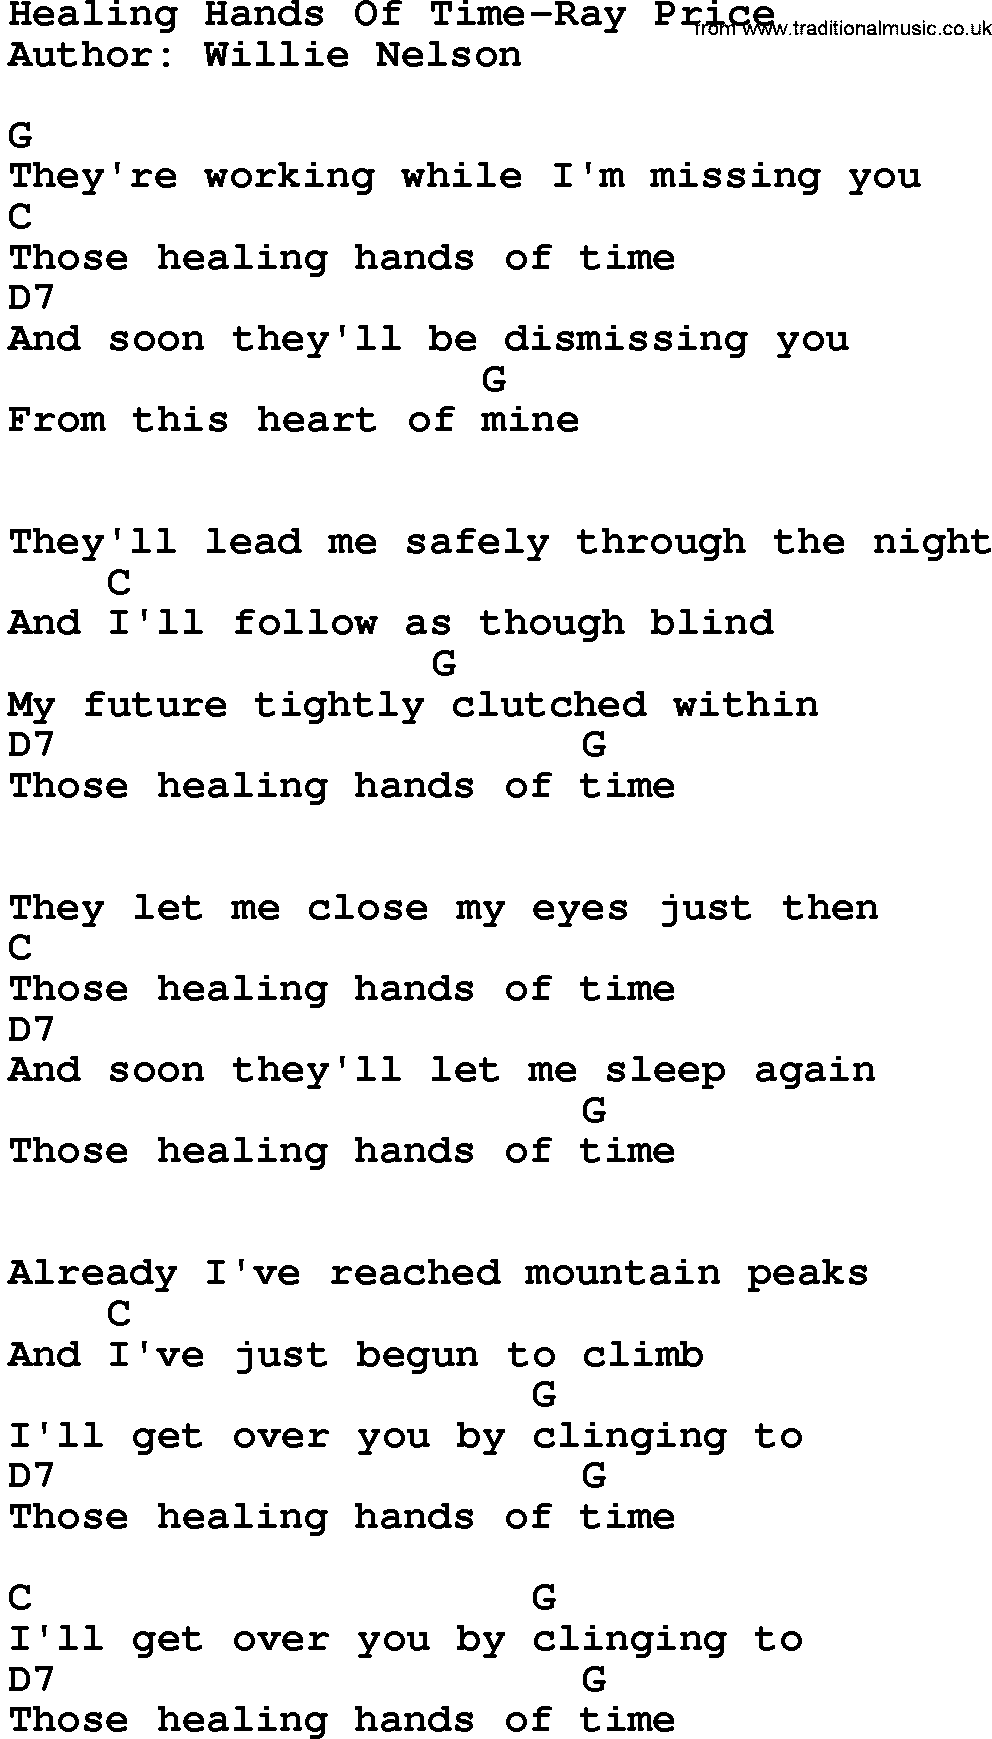 Country music song: Healing Hands Of Time-Ray Price lyrics and chords